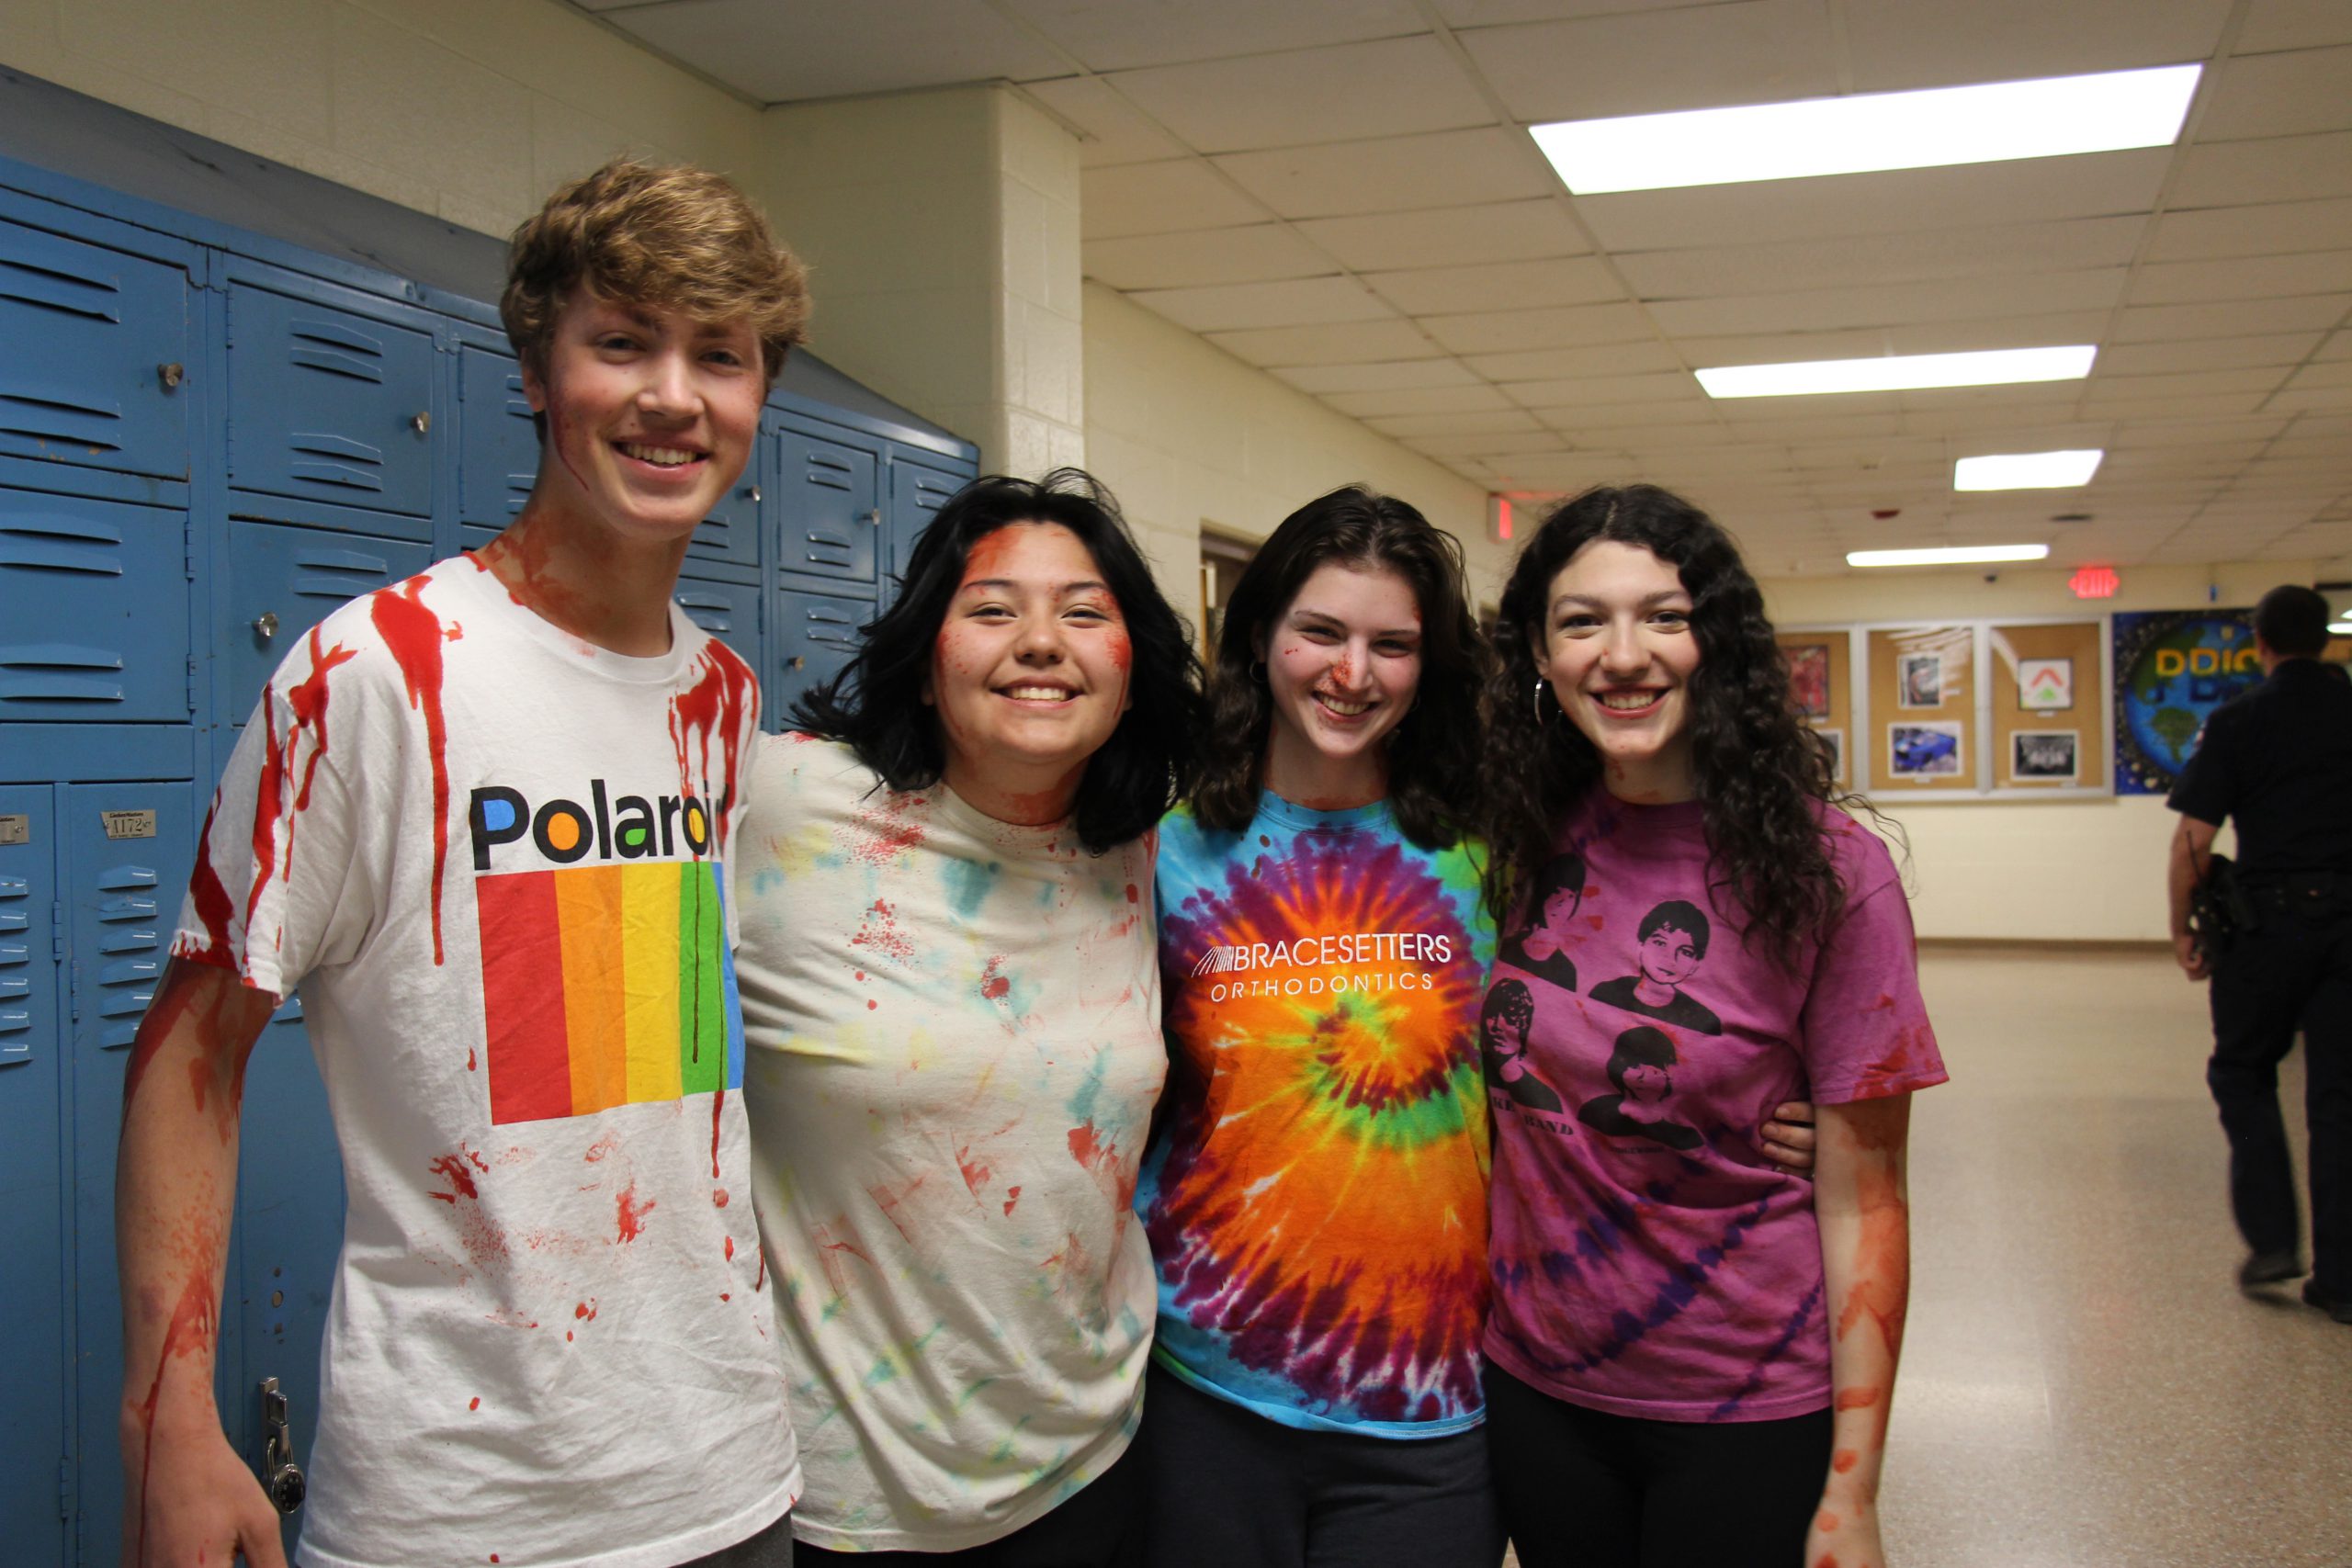 Four high school students, one young man and three young women, stand smiling. They have fake blood on them.